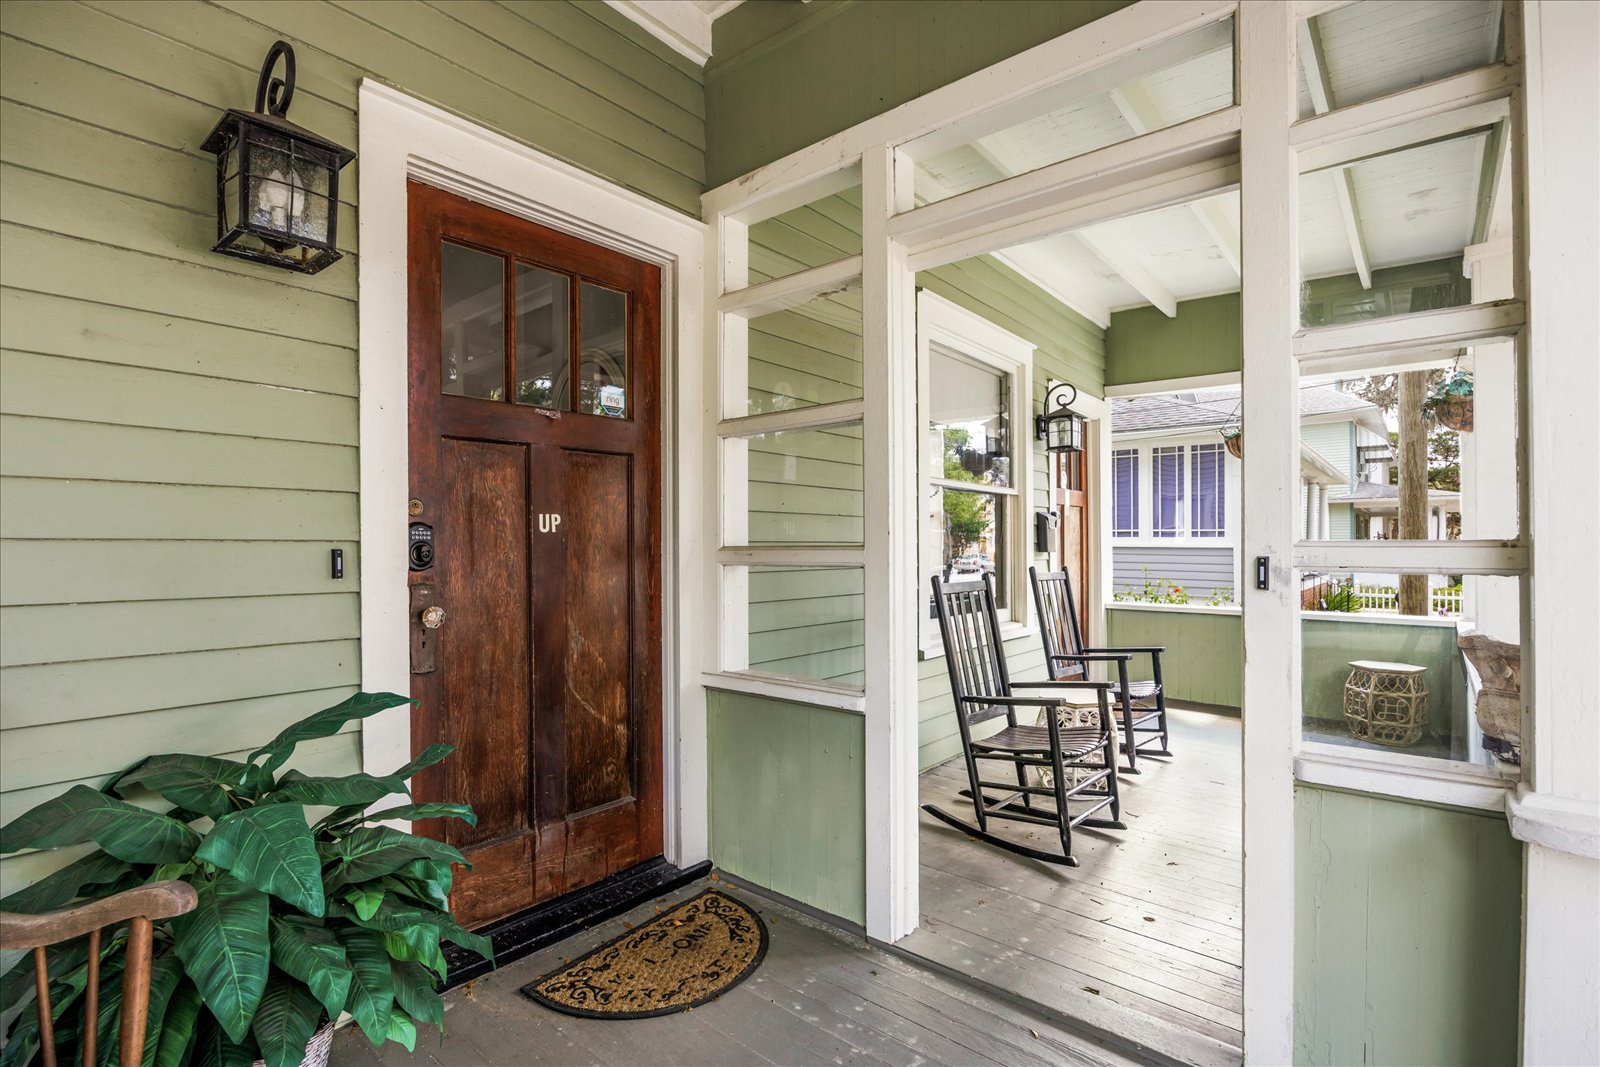 Take in the fresh air on the porch or head into Unit A on the 2nd floor